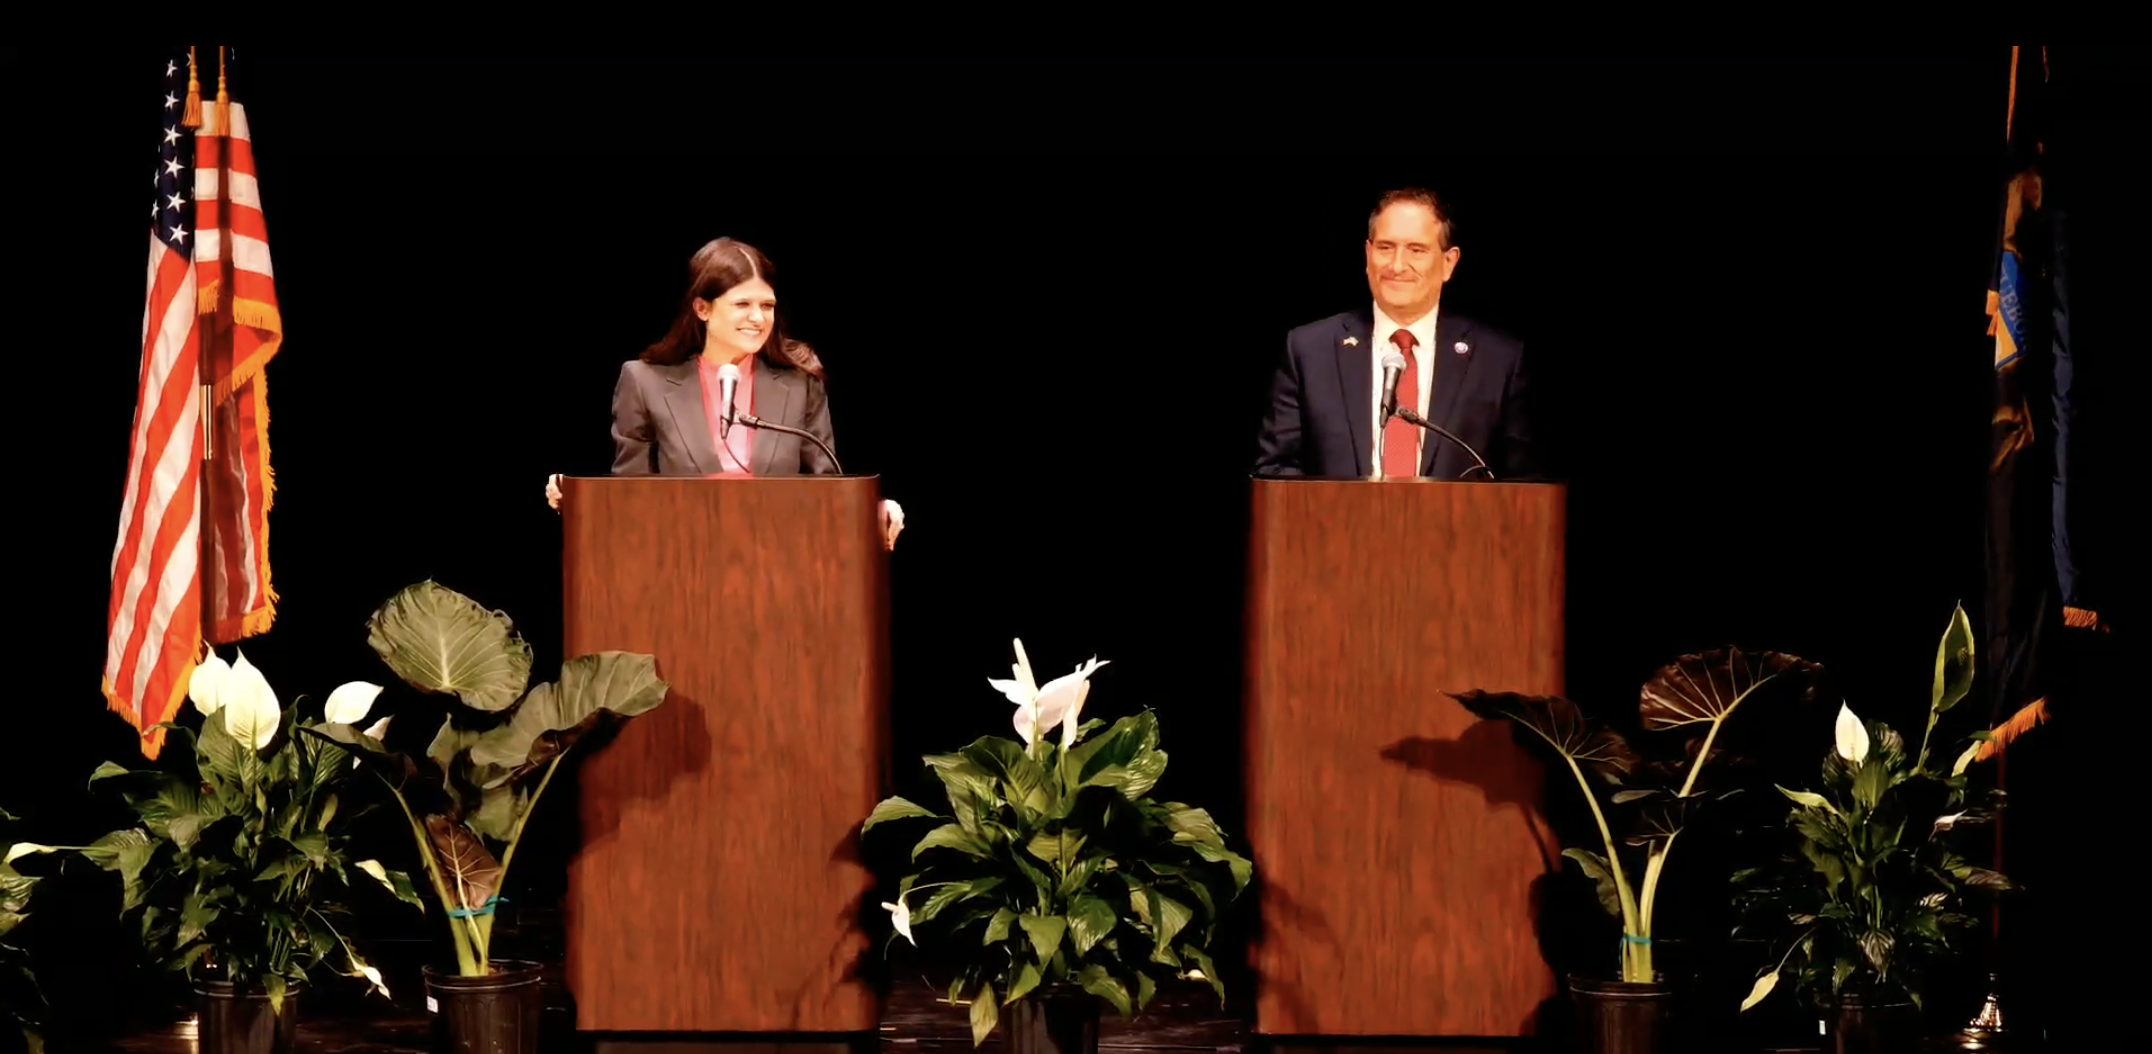 District 11 candidates Haley Stevens and Andy Levin debate at a community forum hosted by Oakland Forward and the Pontiac Community Foundation. Photo: Screengrab/Pontiac Community Foundation